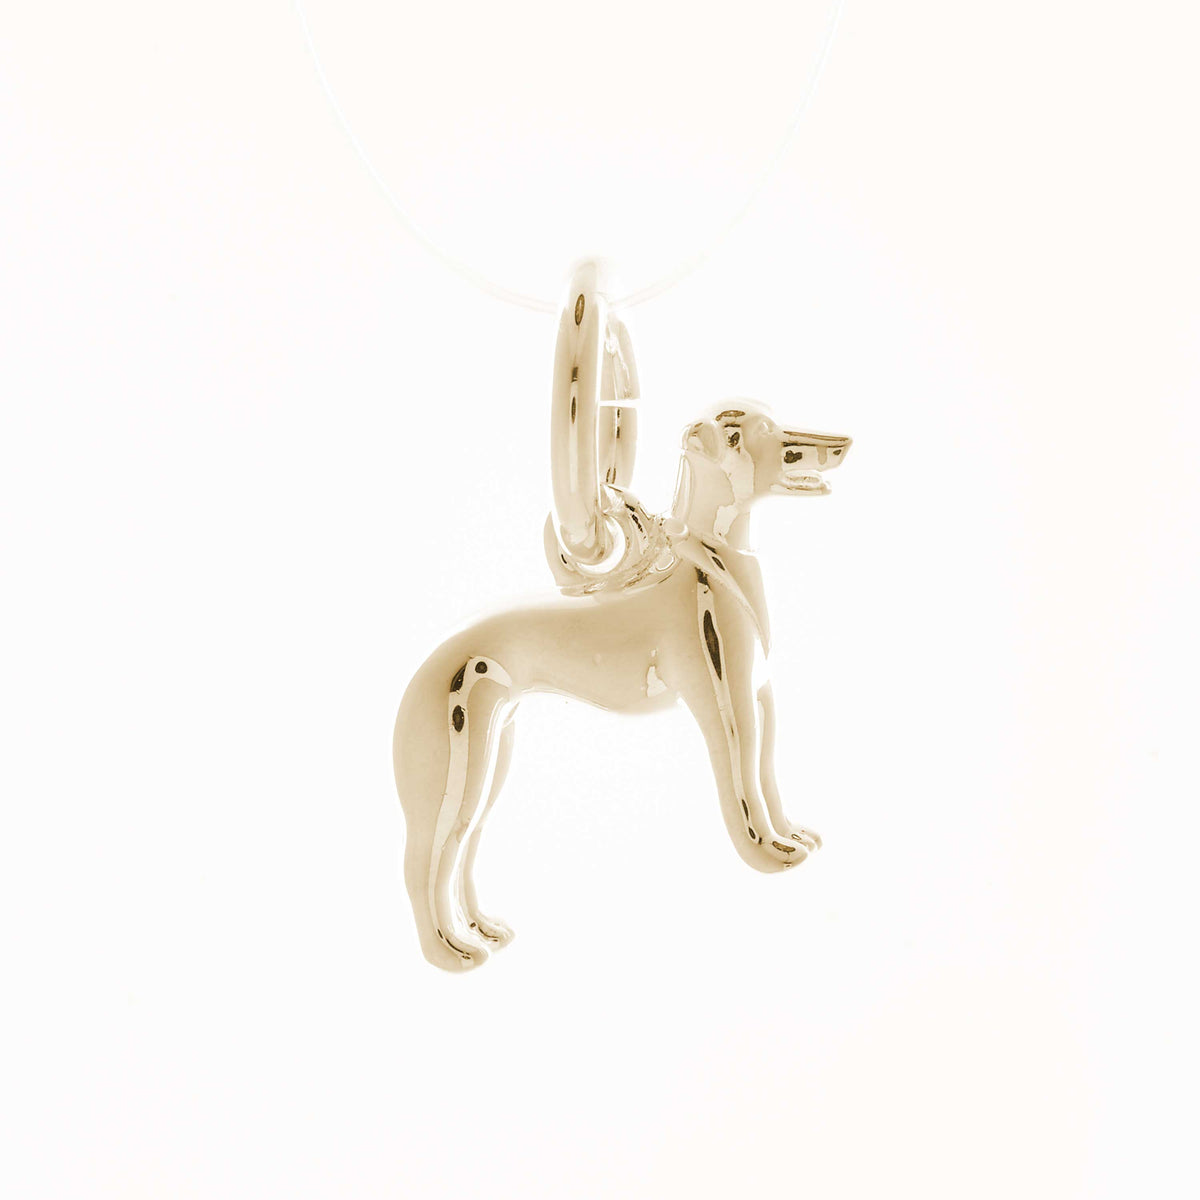 Solid 9ct gold Whippet charm with tiny bandana (optional), perfect for a charm bracelet or necklace.